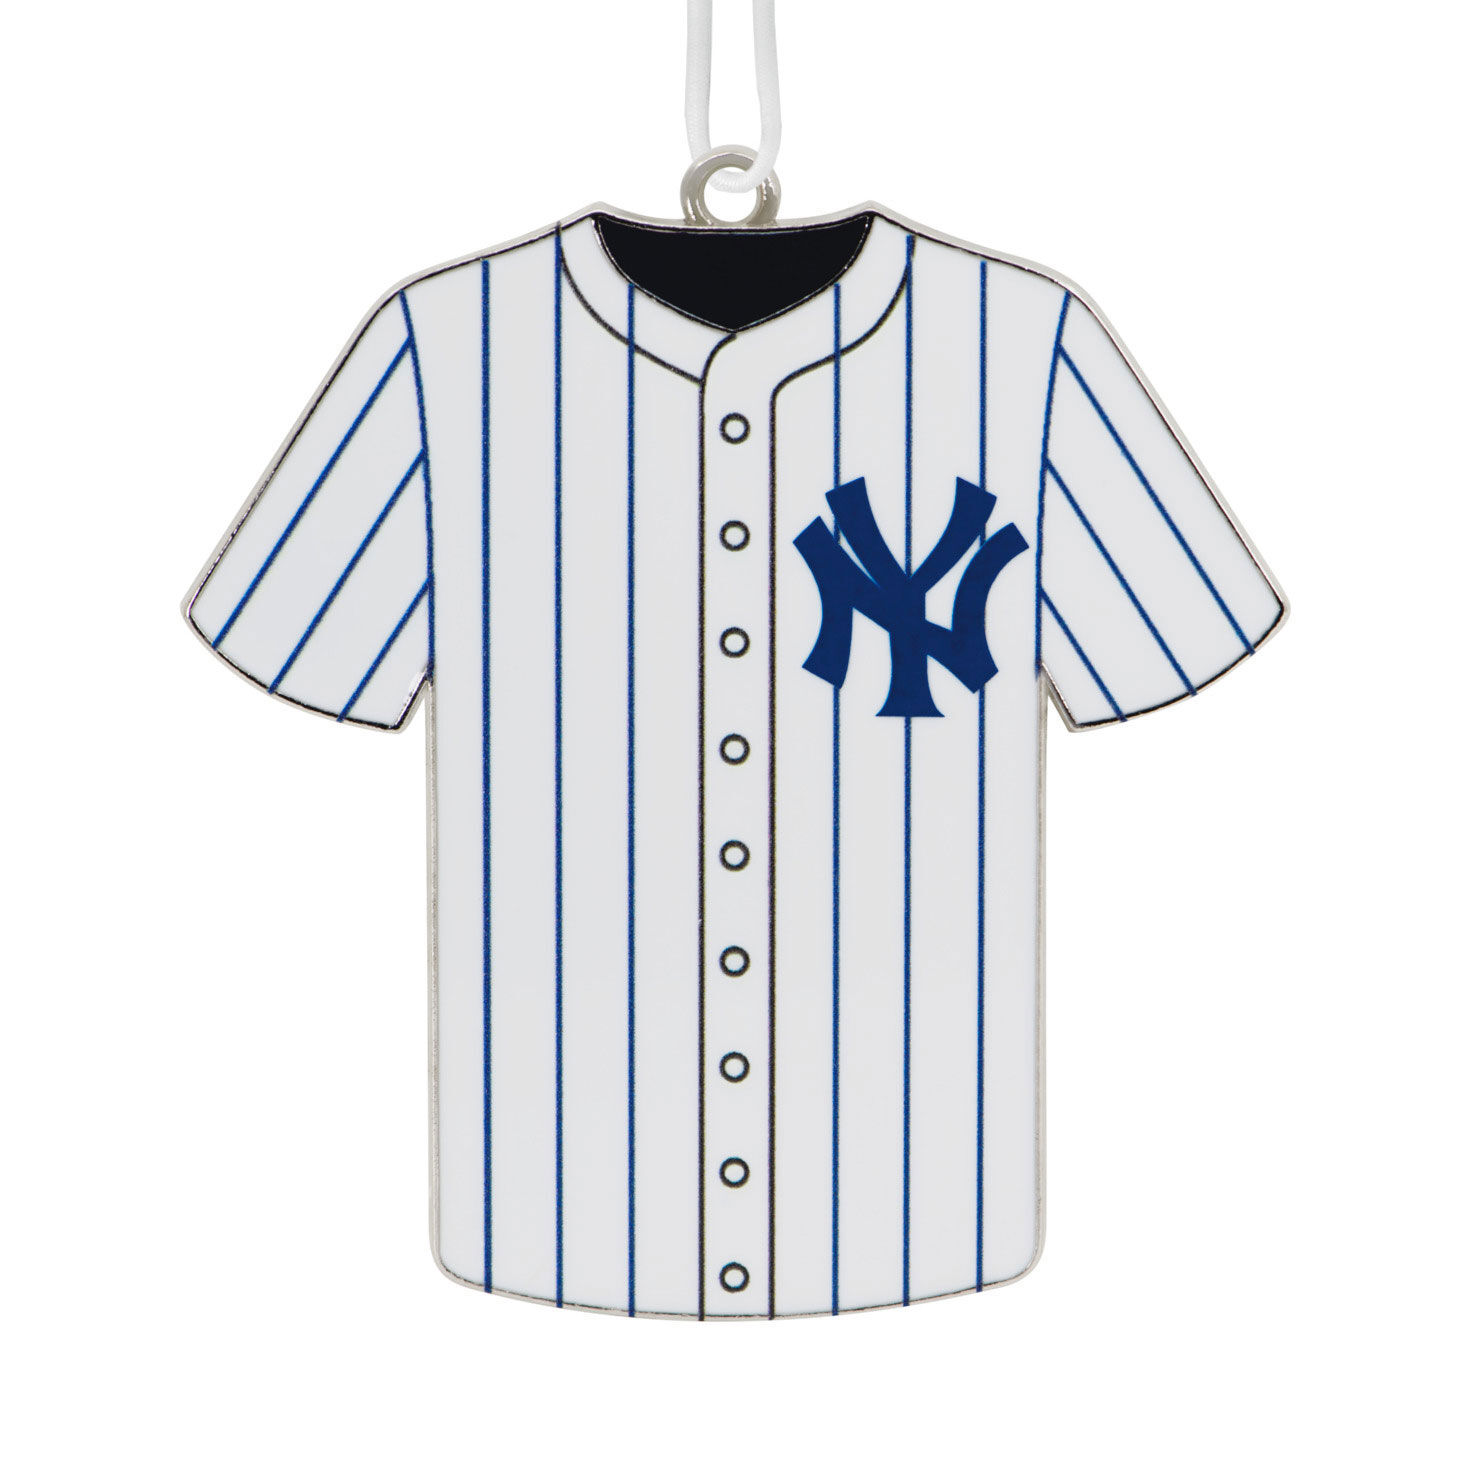 ny yankees button up jersey